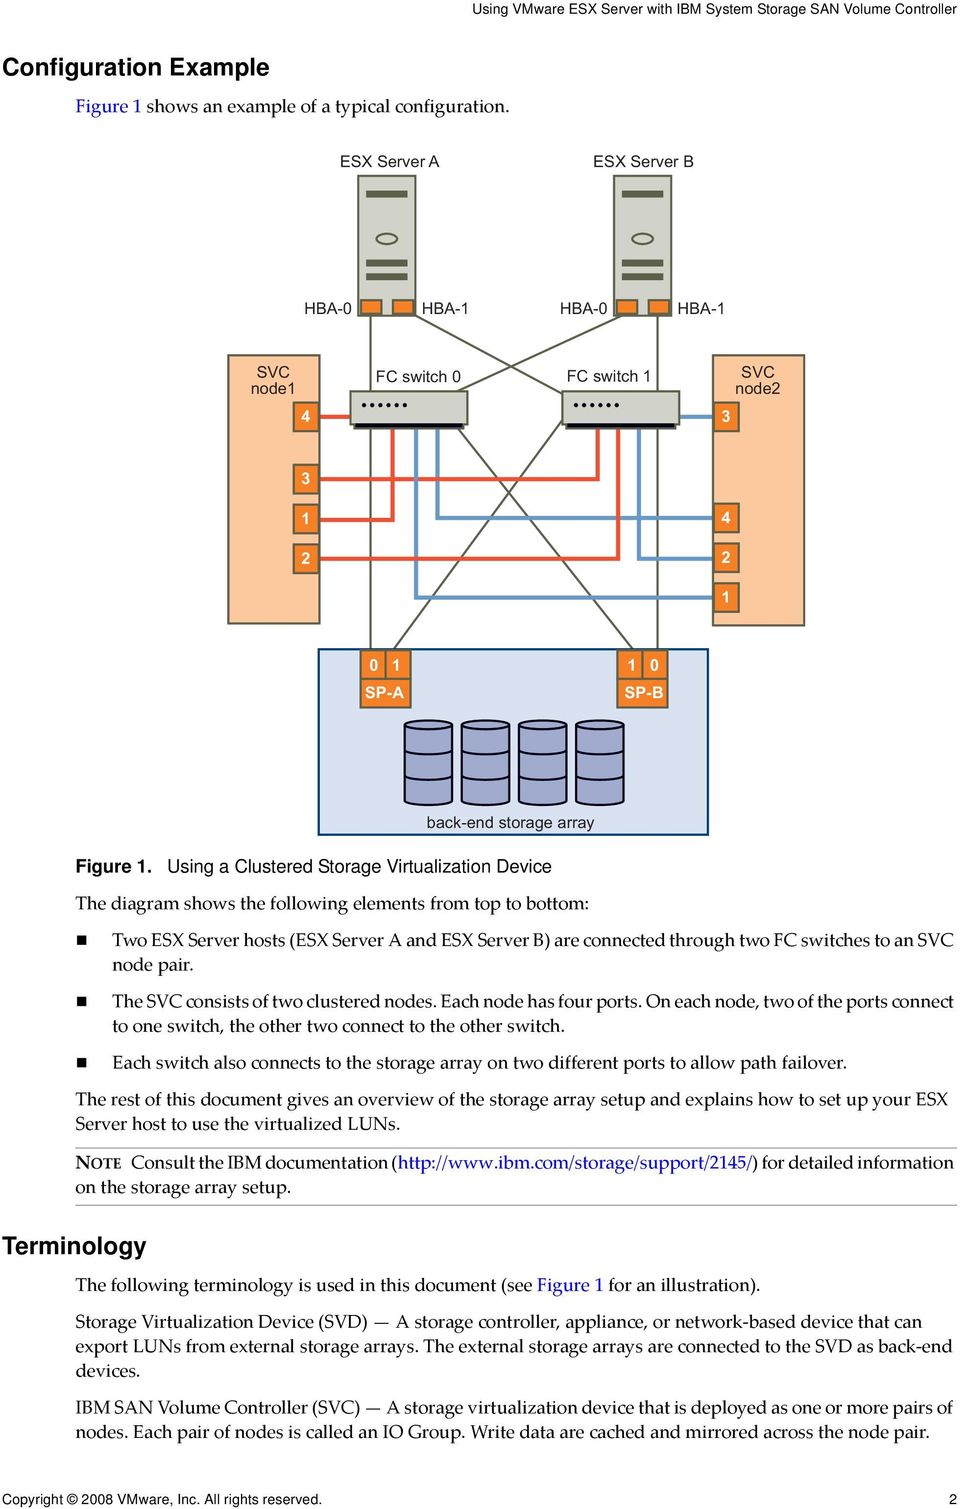 Using a Clustered Storage Virtualization Device The diagram shows the following elements from top to bottom: Two ESX Server hosts (ESX Server A and ESX Server B) are connected through two FC switches